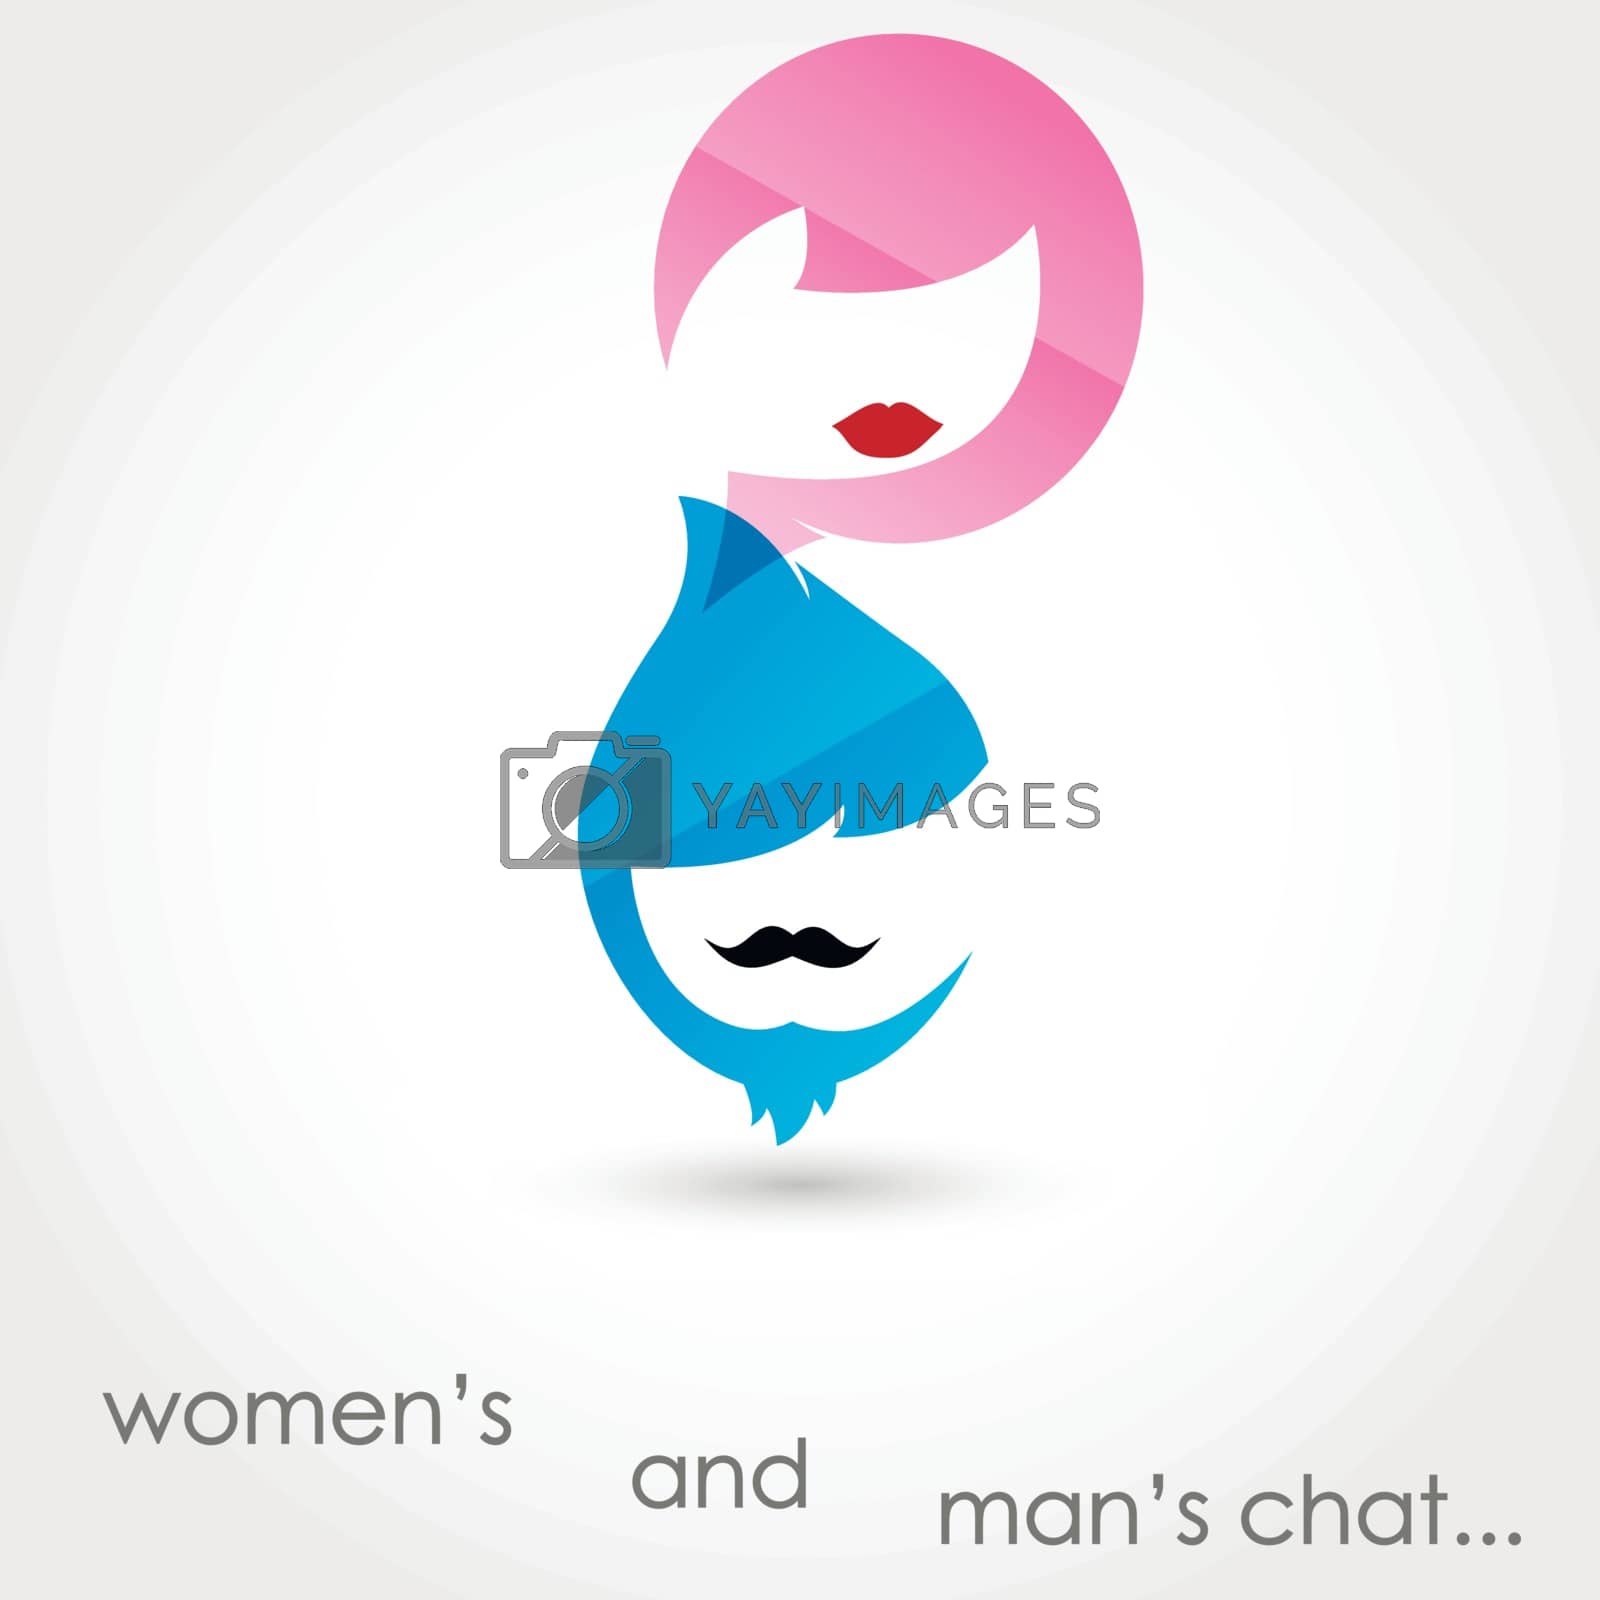 Royalty free image of Man's and women's chat by Coline